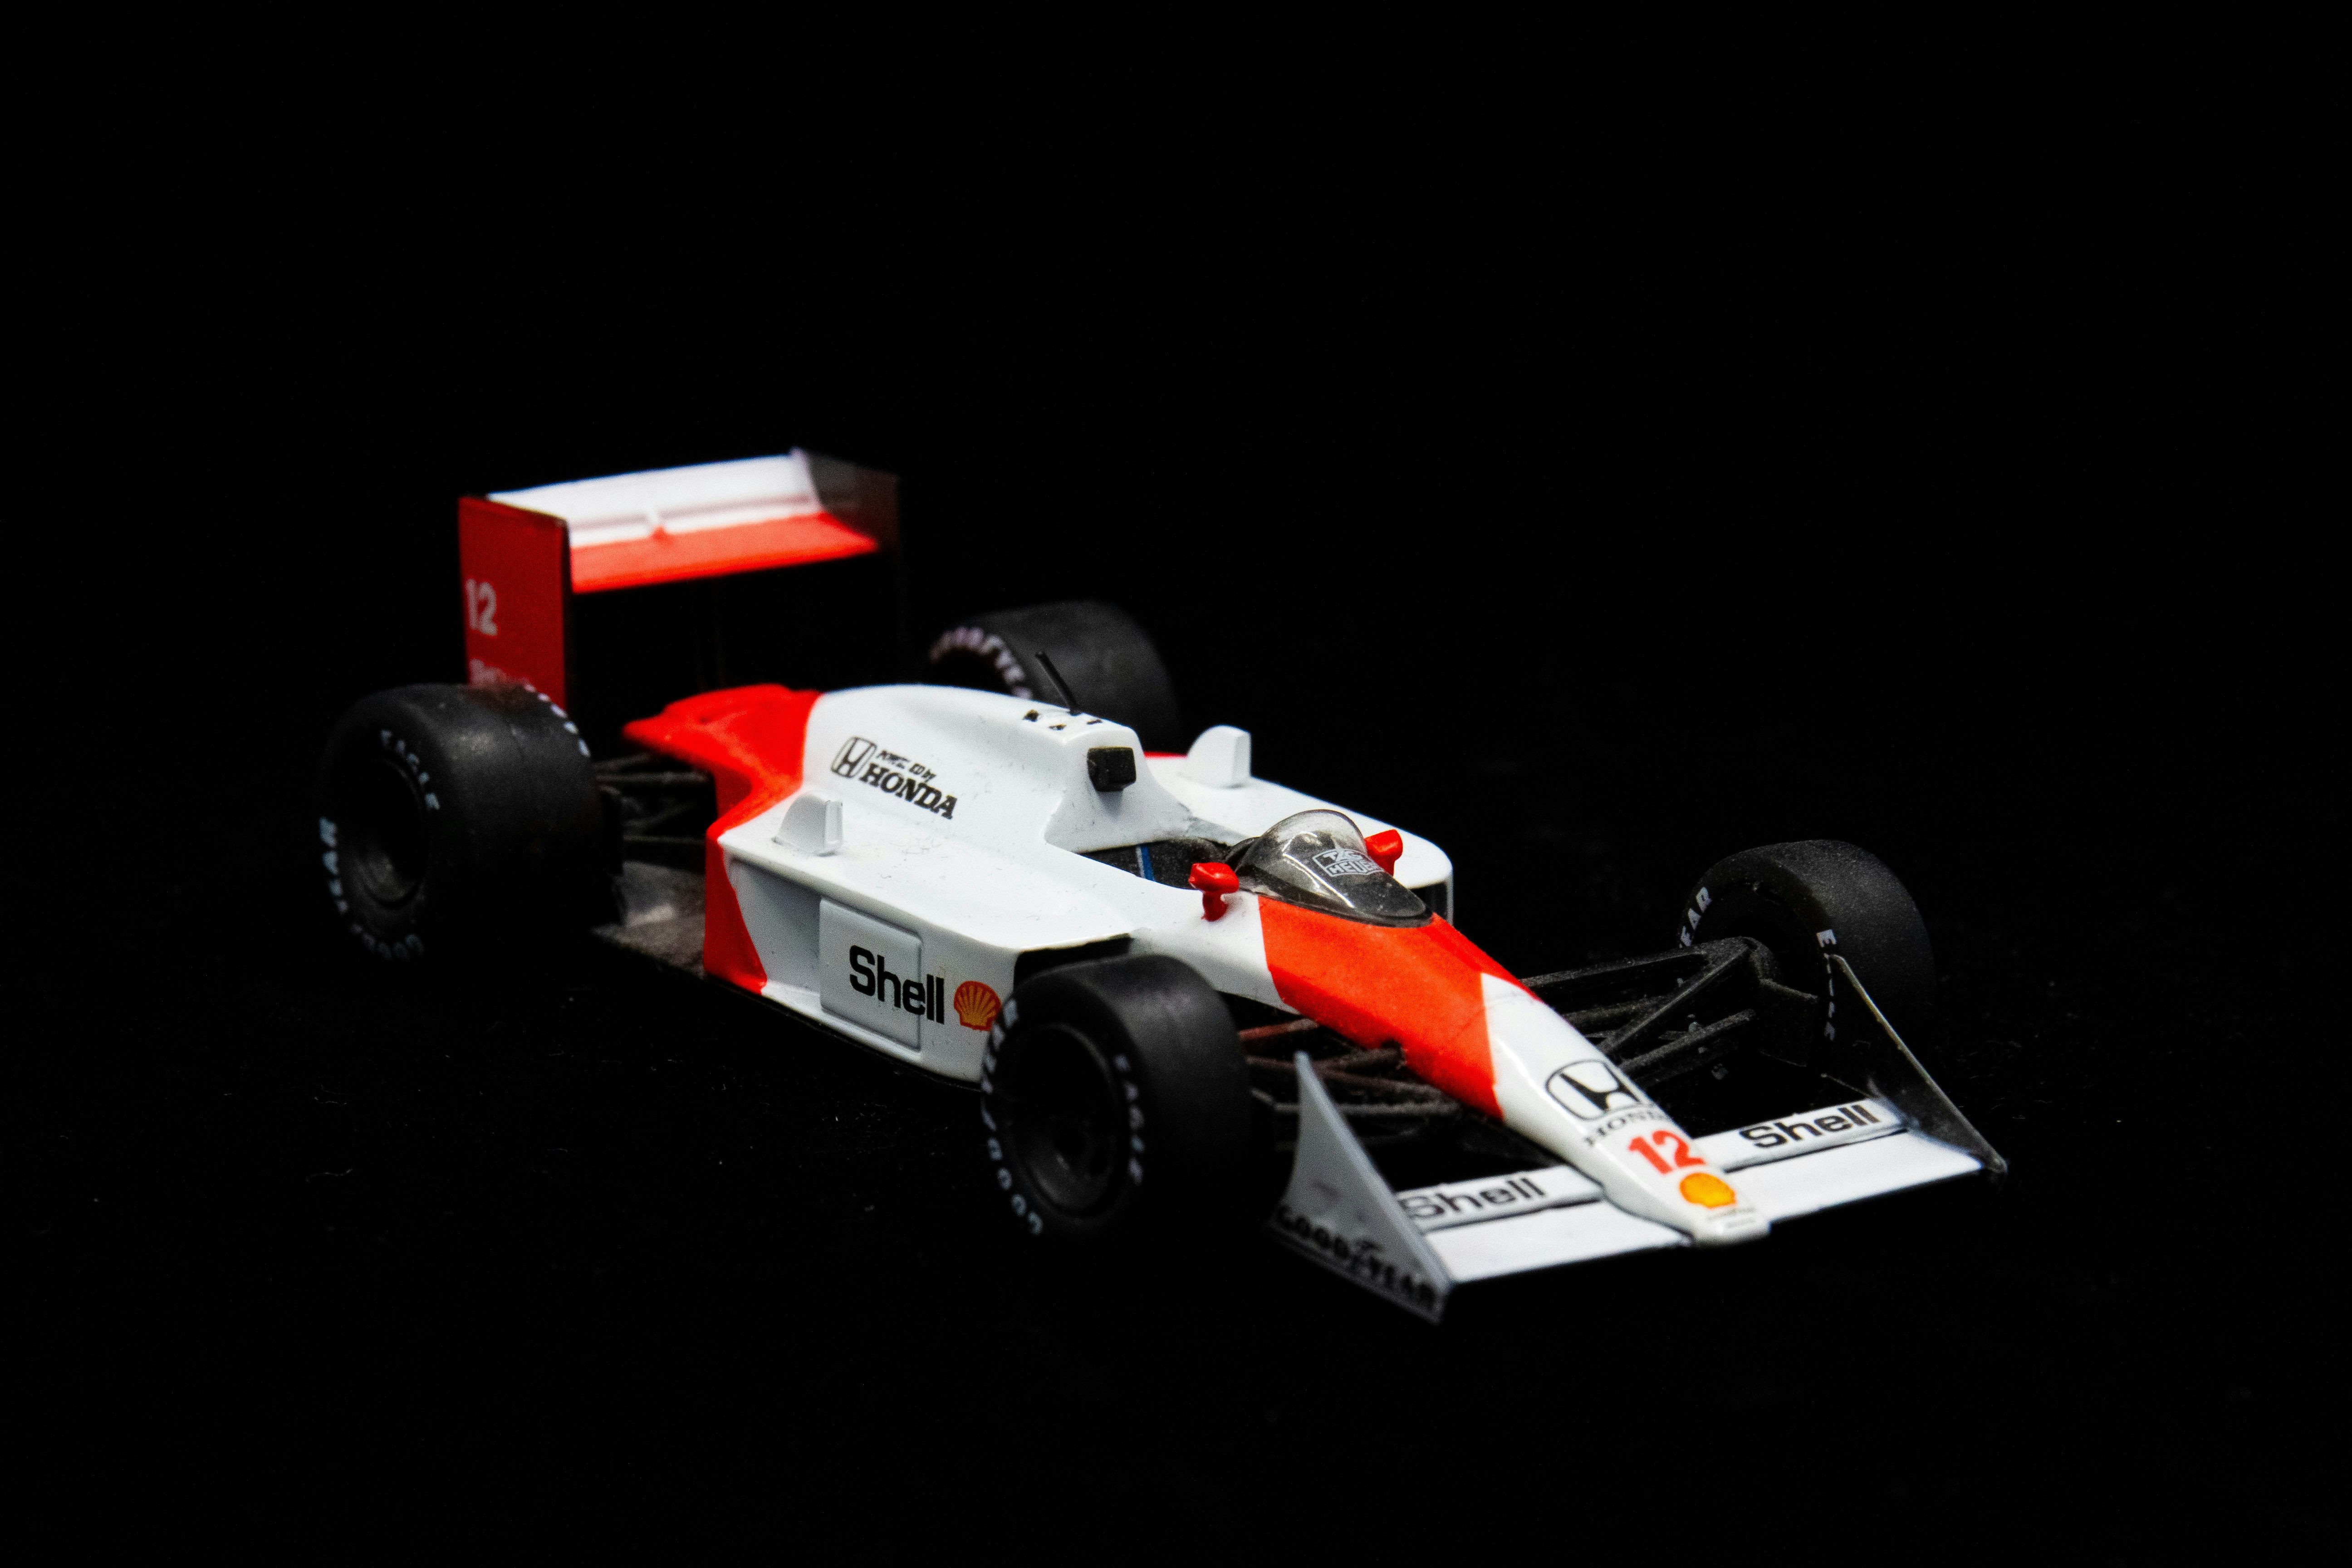 Red and white mclaren mp4/4
-
-
-
Hey, if you like my work and want to see more, follow me on Instagram: https://www.instagram.com/myrstump -Contact me at - Philip@myrtorp.net -Paypal Support: paypal.me/pmyrtorp
